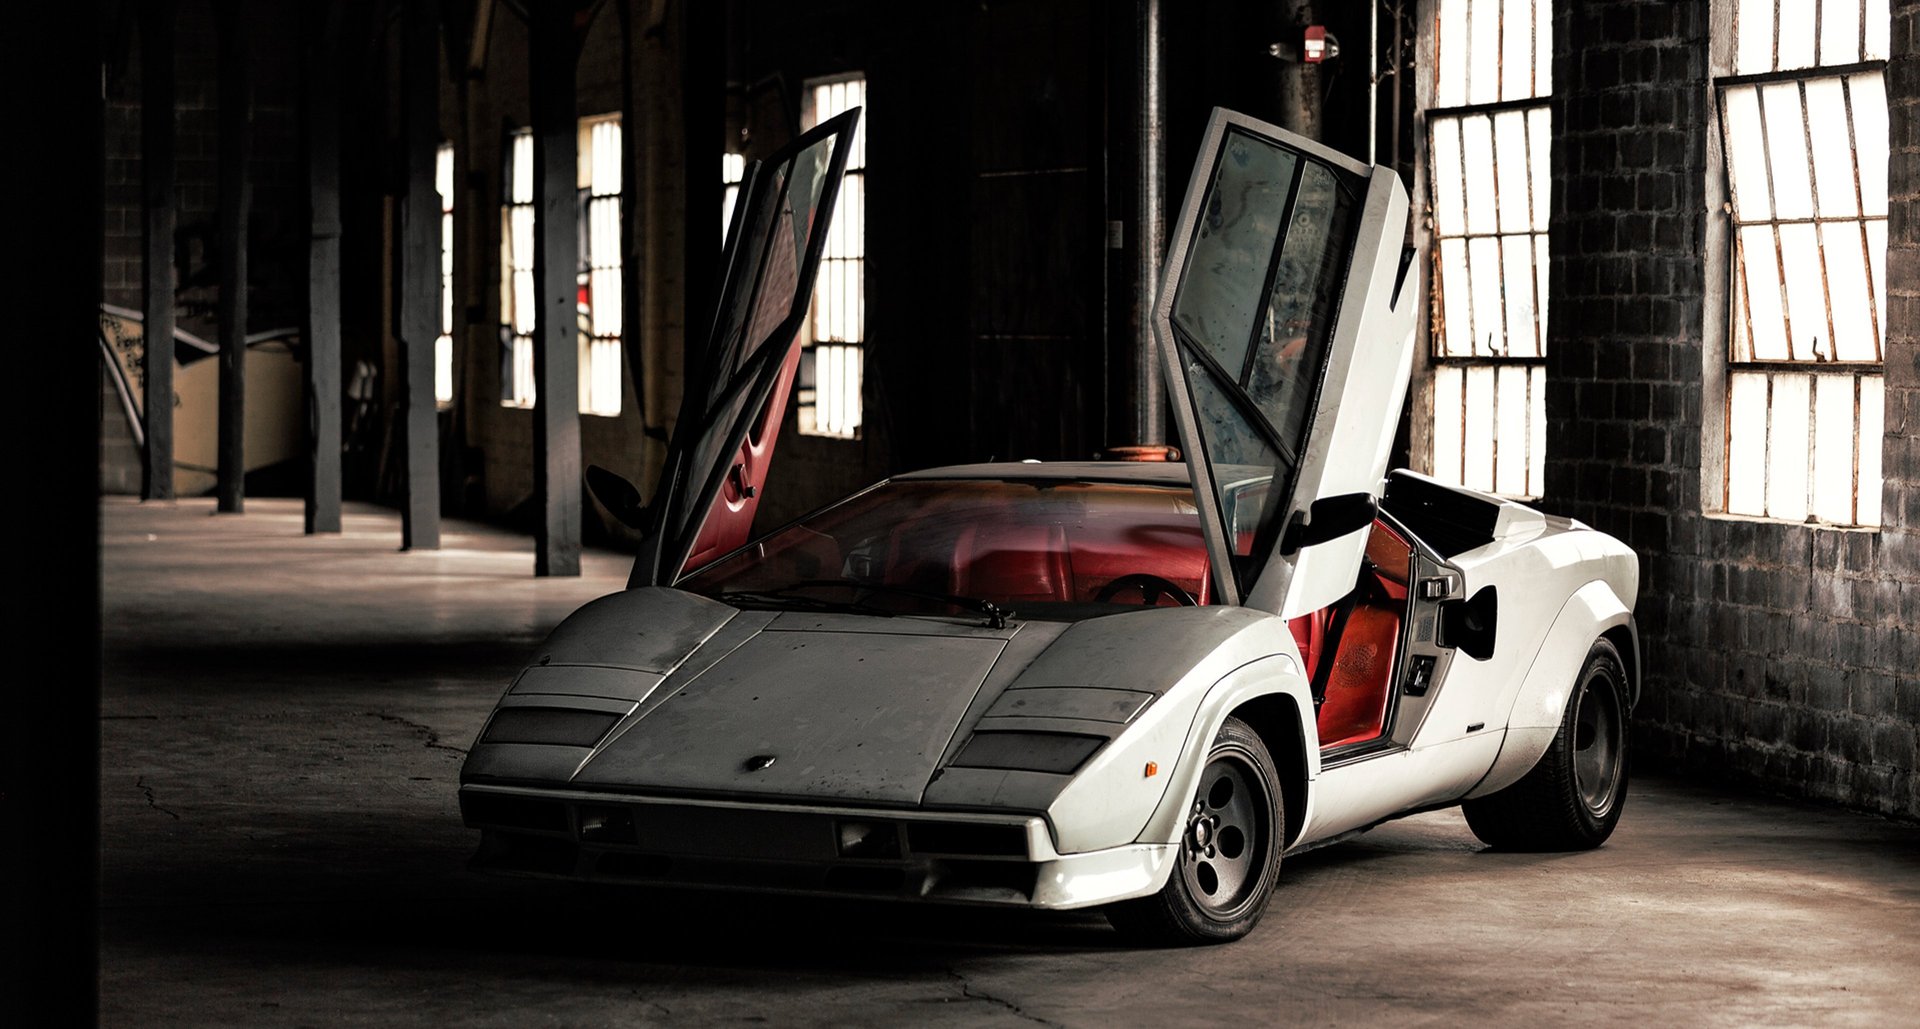 Is this ex-rockstar Lamborghini Countach the barn find of the year?